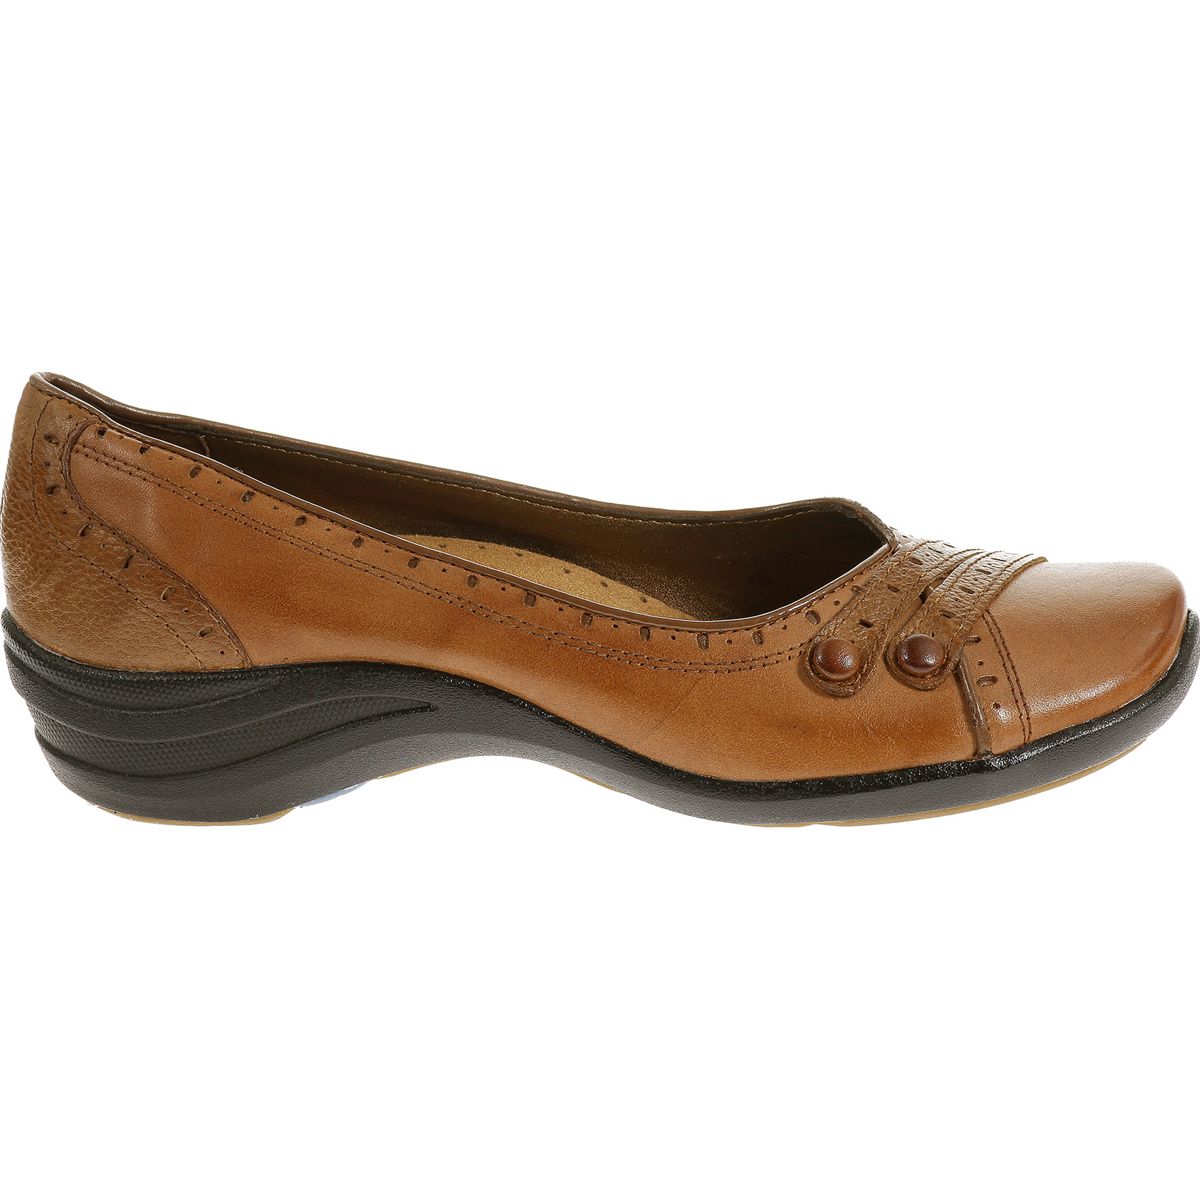 tan leather slip on shoes womens